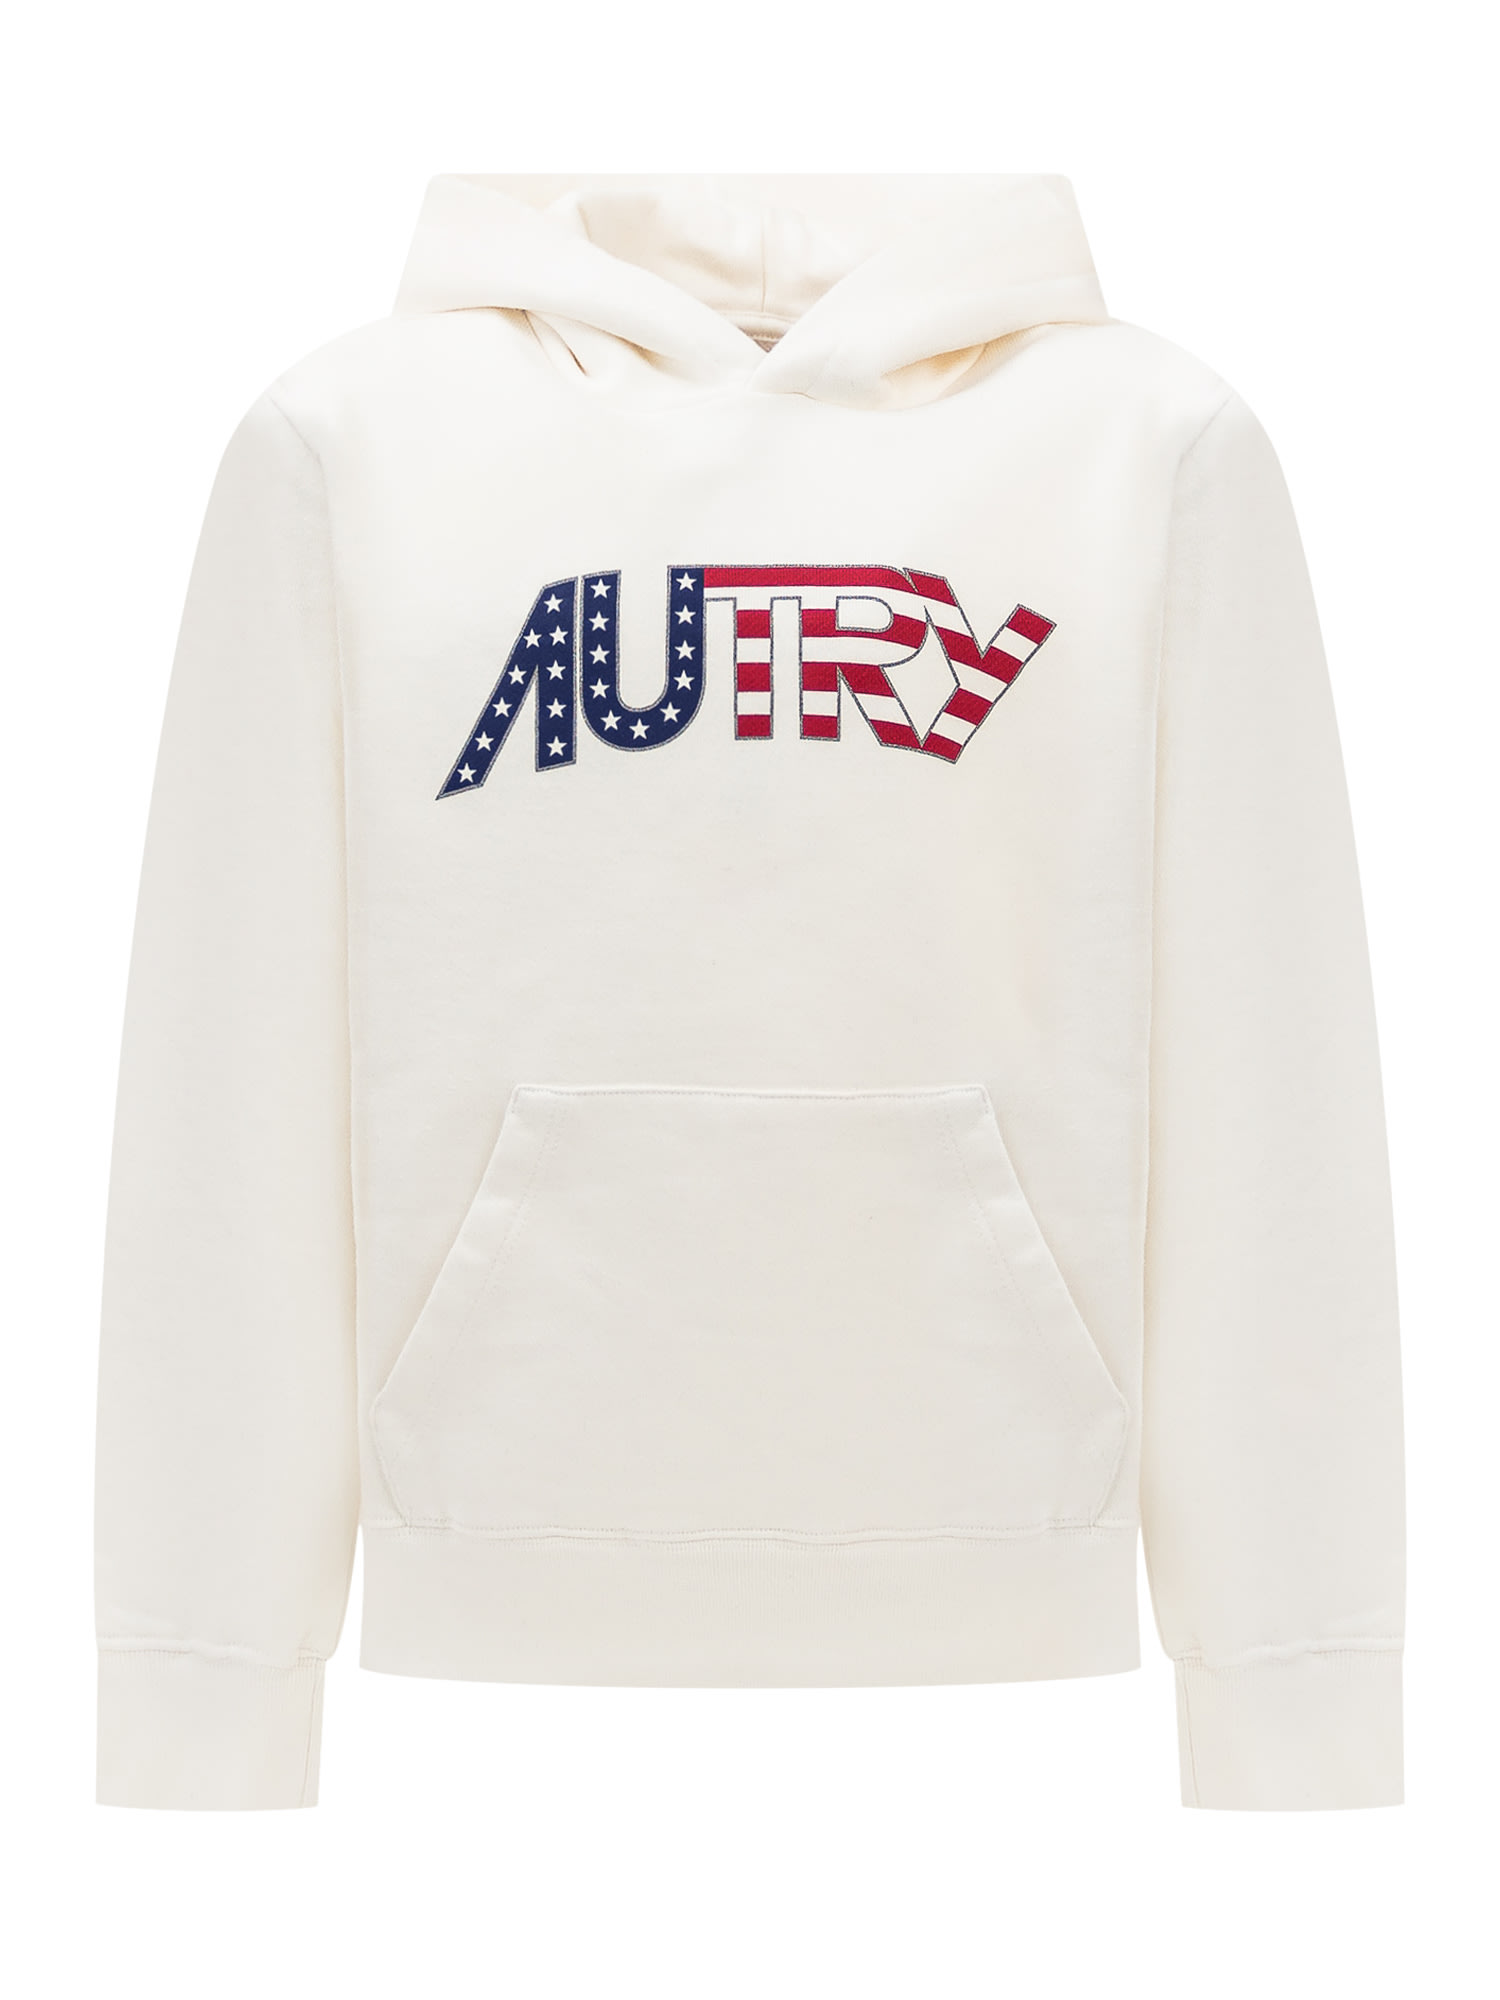 Shop Autry Hoodie With Logo In Apparel White